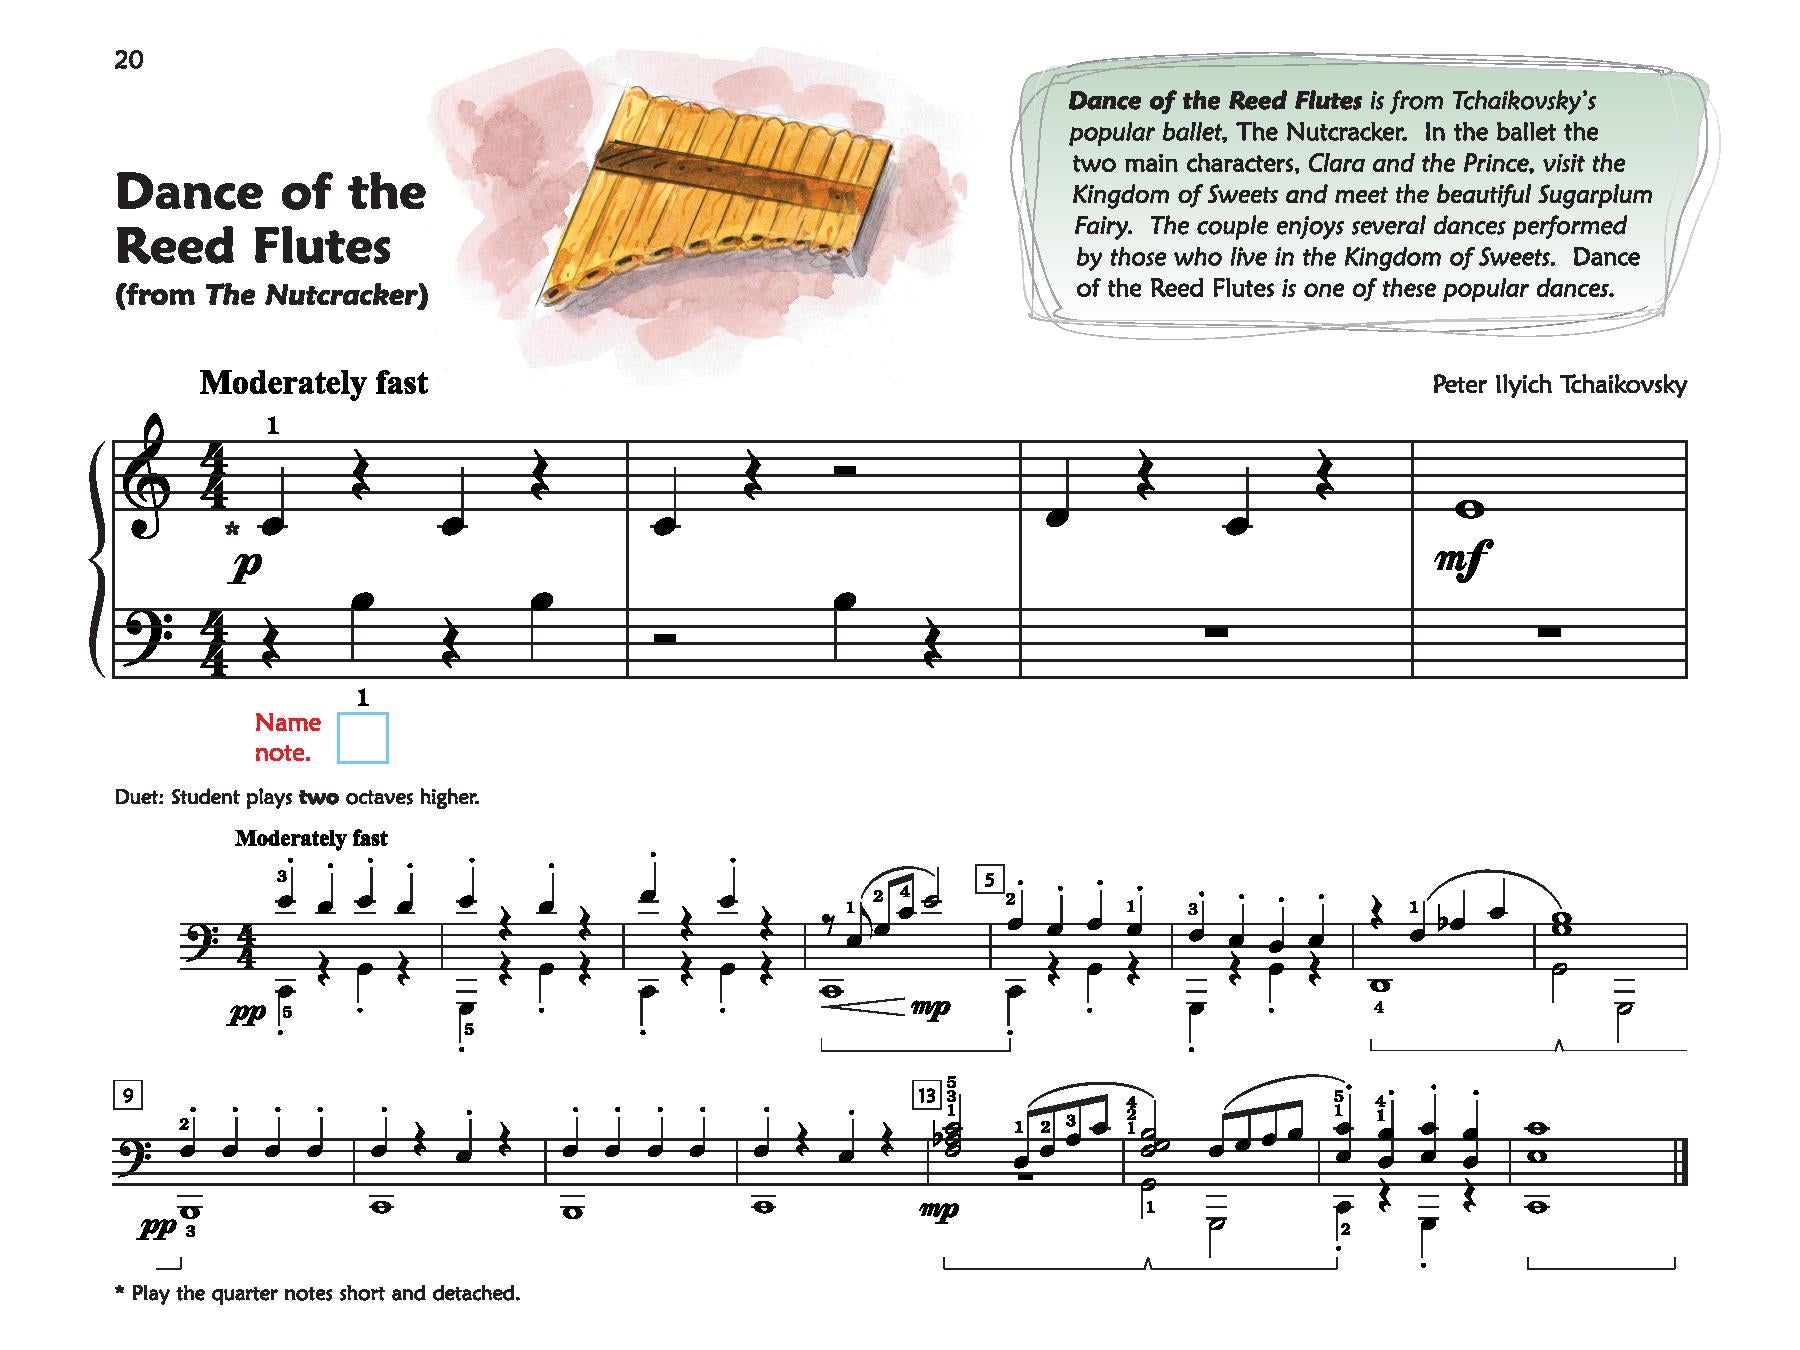 Alfred's Premier Piano Course, Christmas 1A